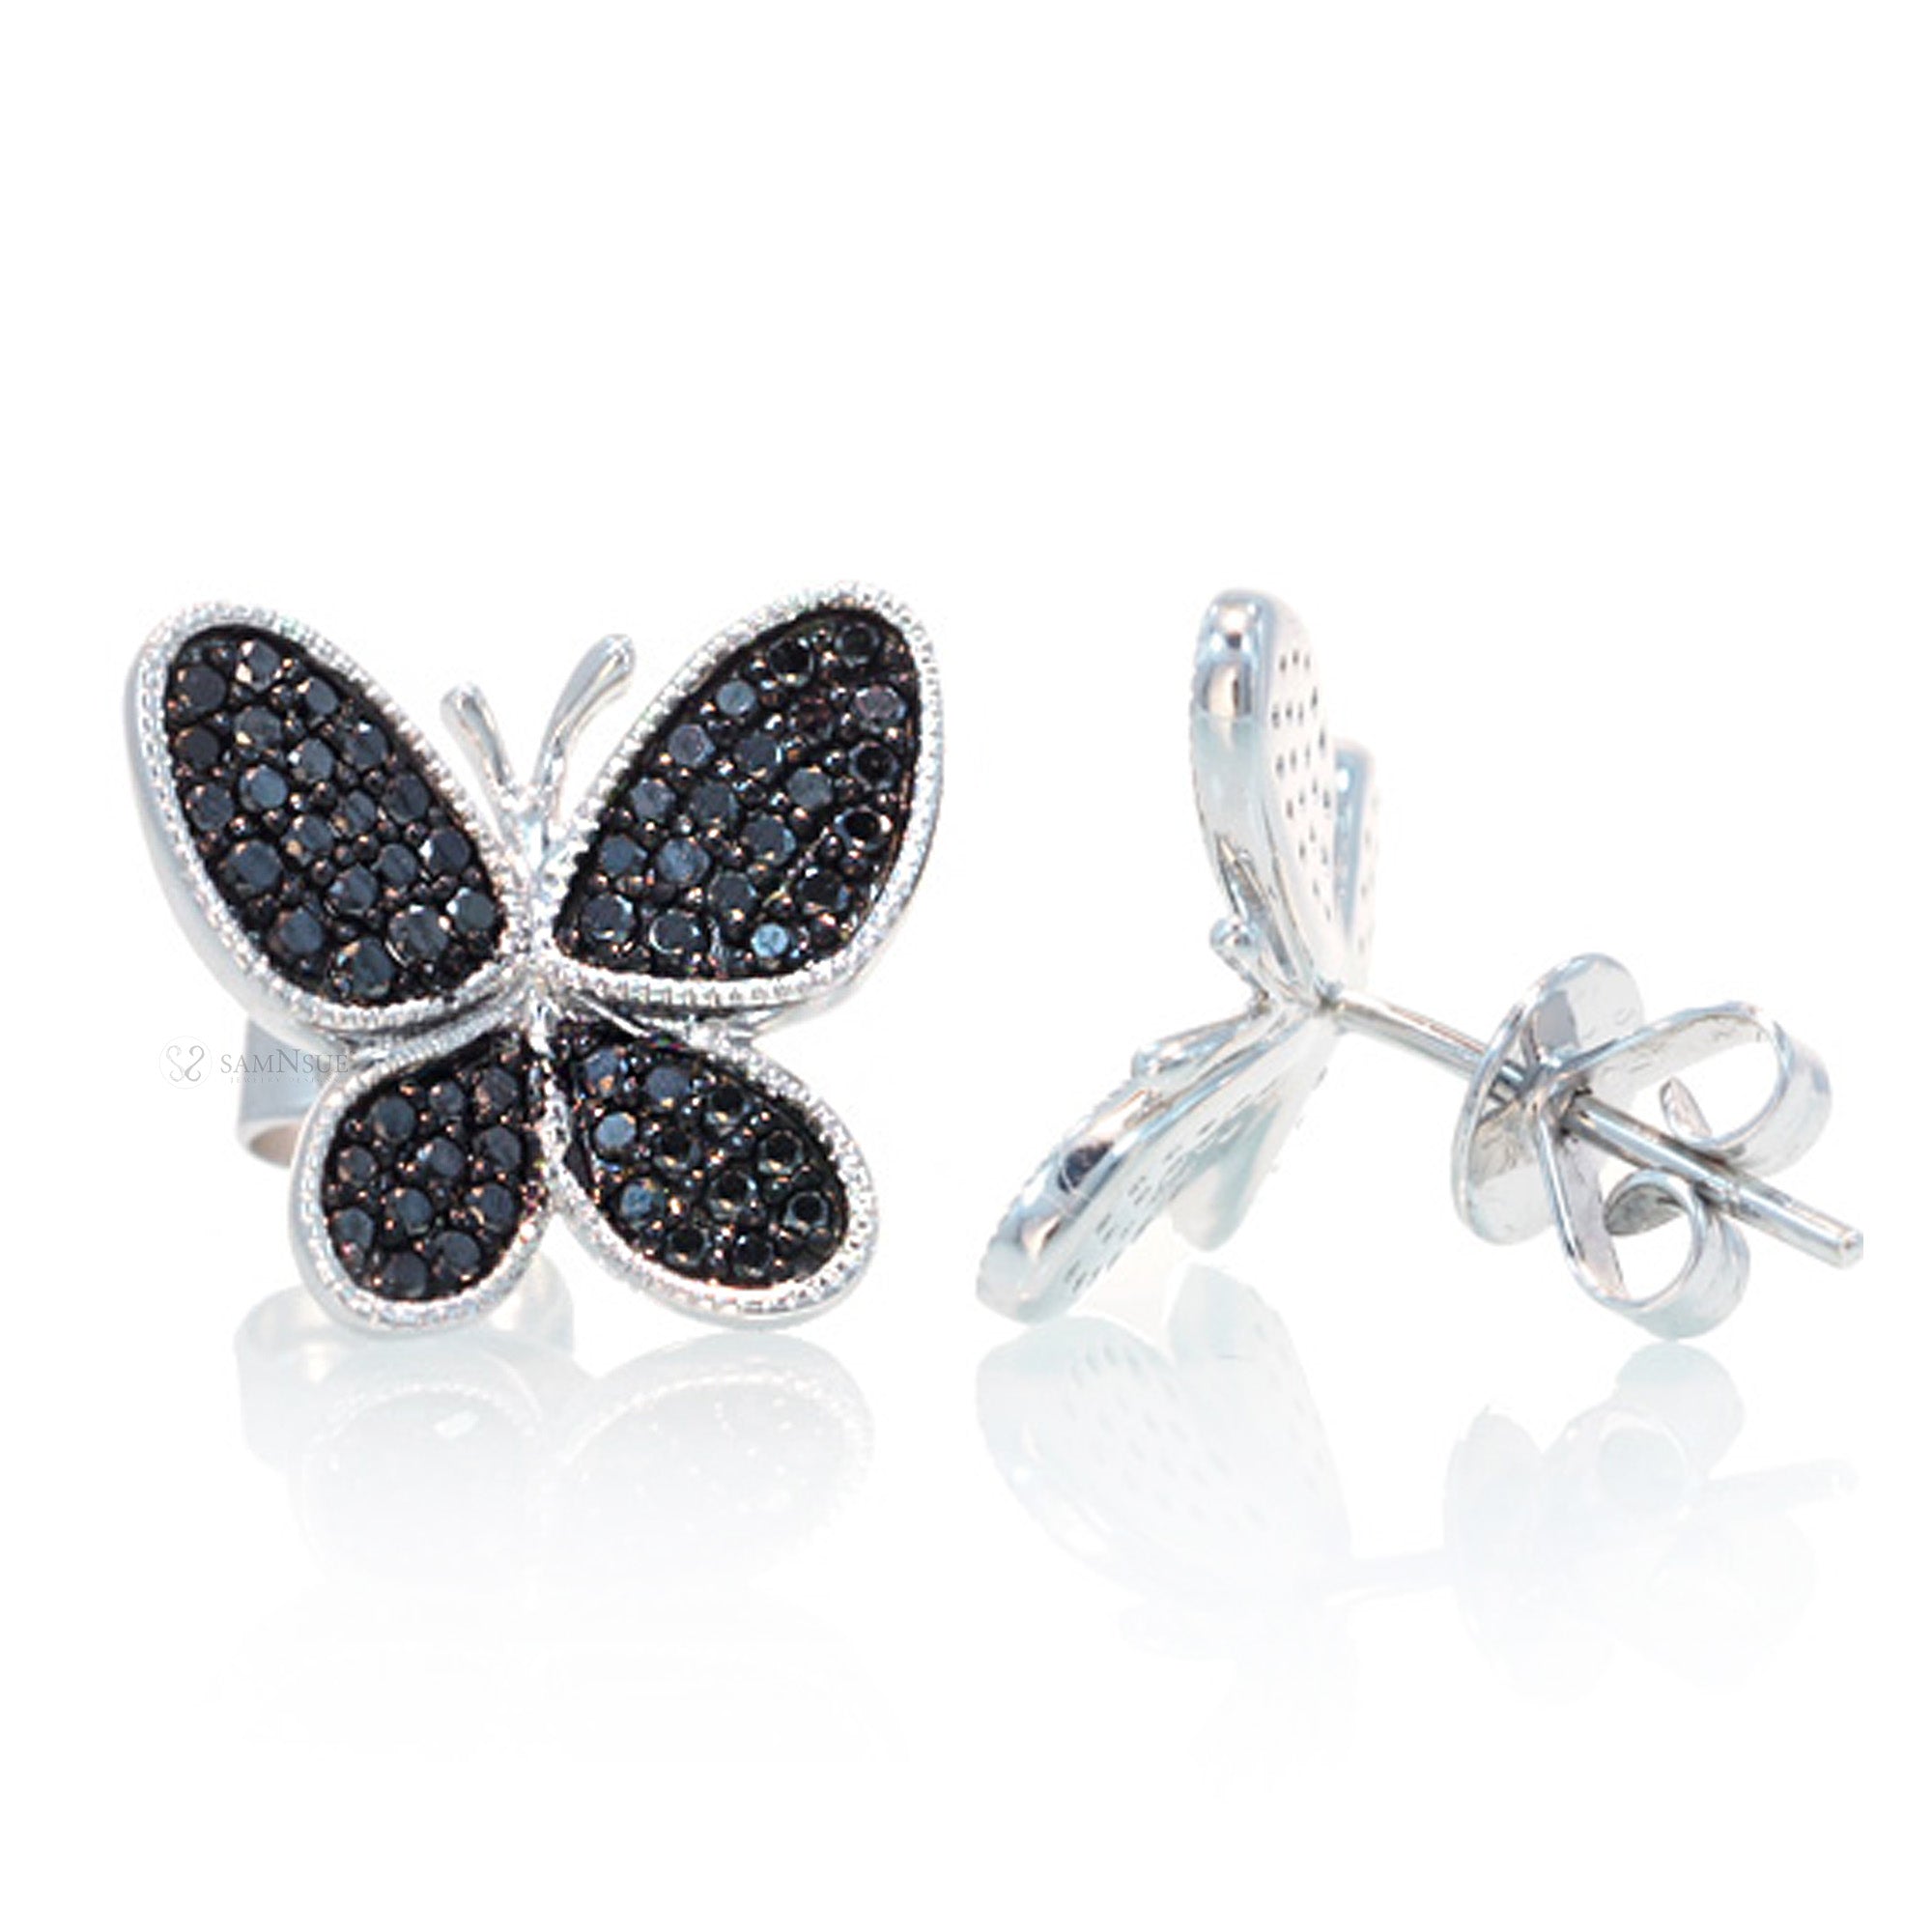 Butterfly studs with black diamonds